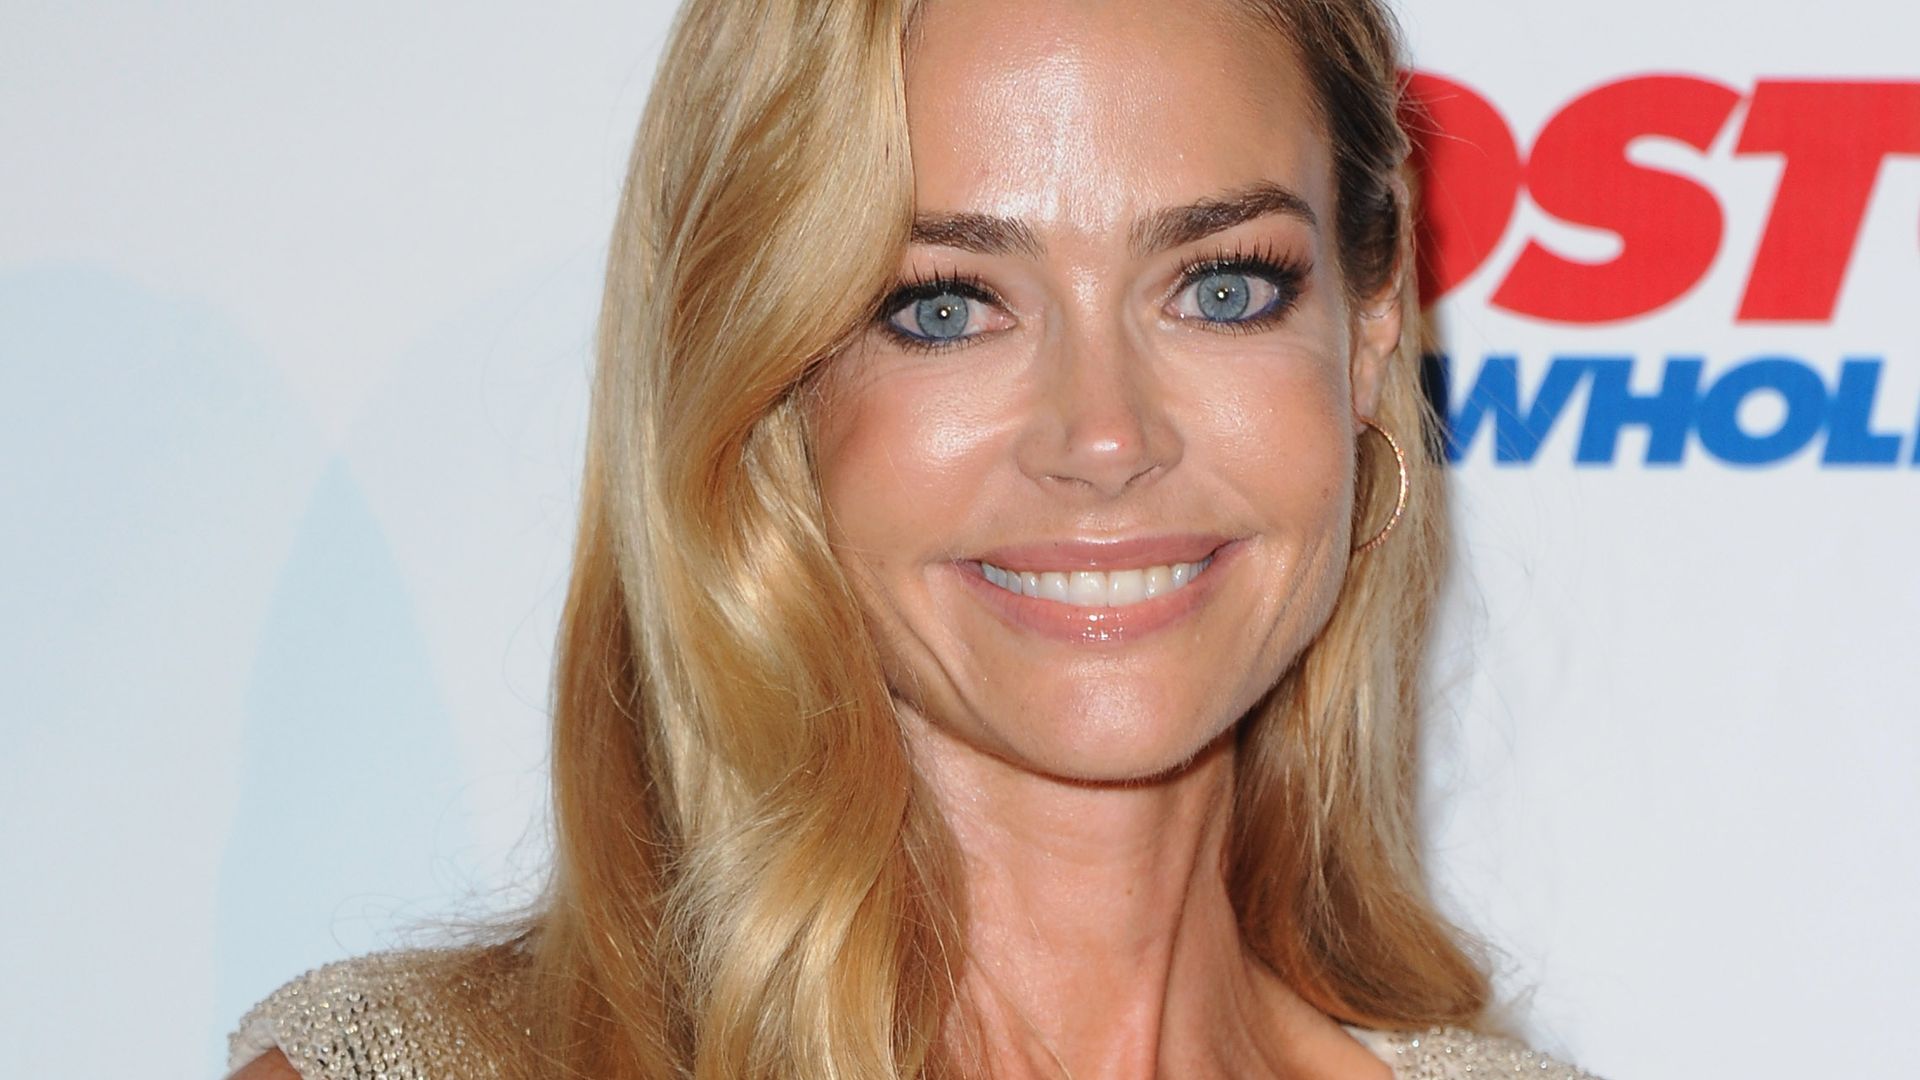 Denise Richards looks sensational in sheer dress and heels - and fans all have the same reaction